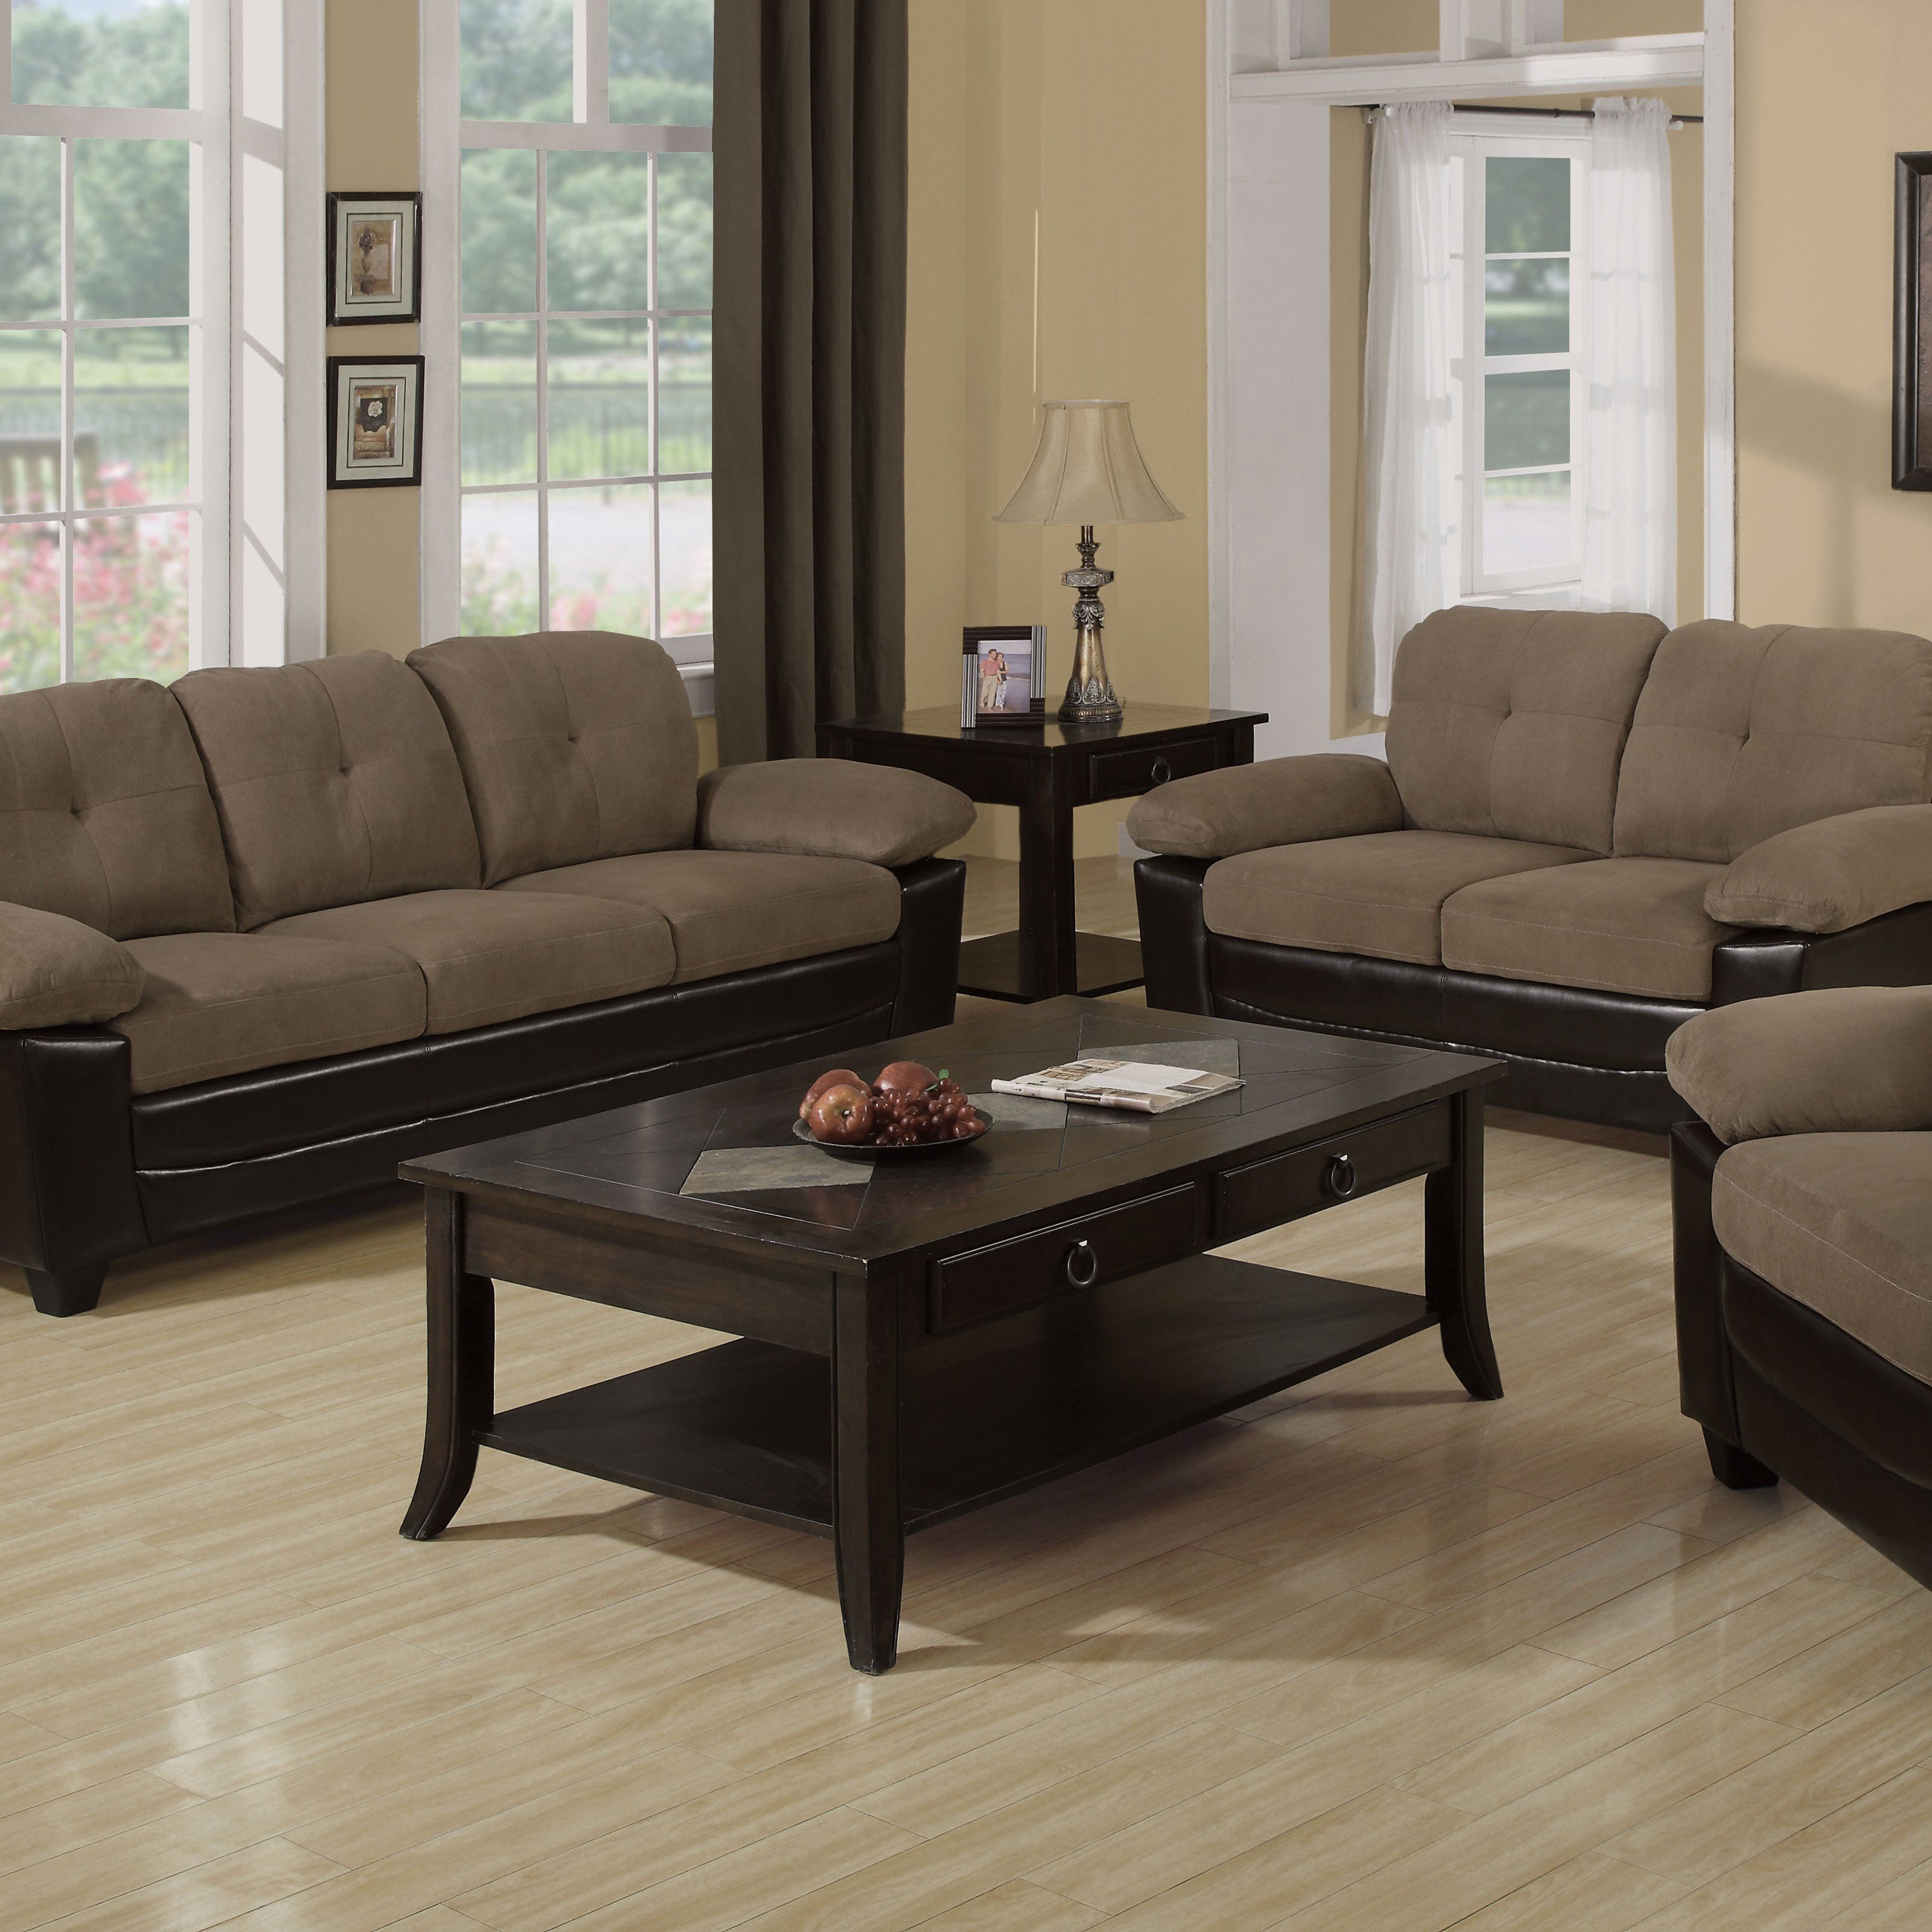 Have To Have It. Kiara Microfiber Sofa With Loveseat And Chair Inside Kiara Sofa Chairs (Photo 5 of 25)